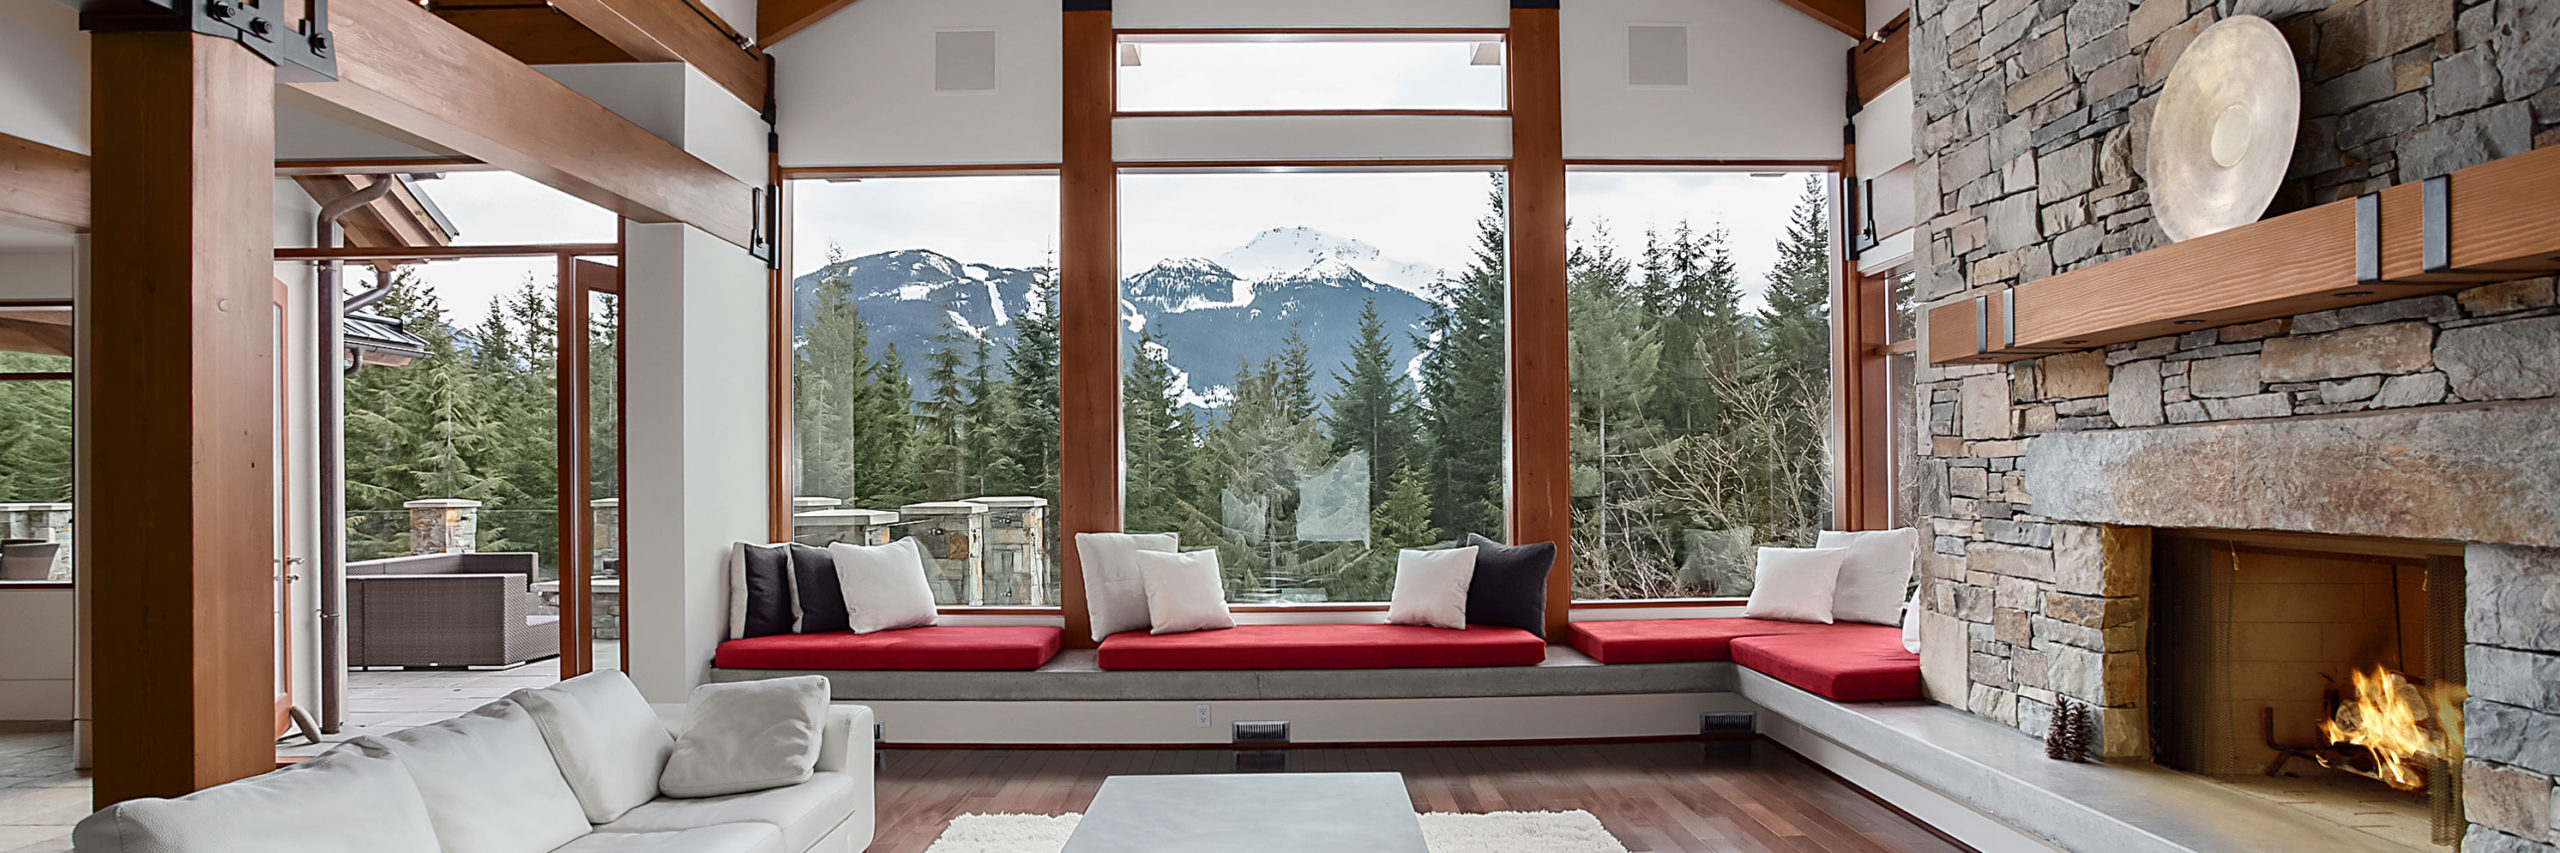 Luxury Whistler Vacation Rentals: Our Winter A-List